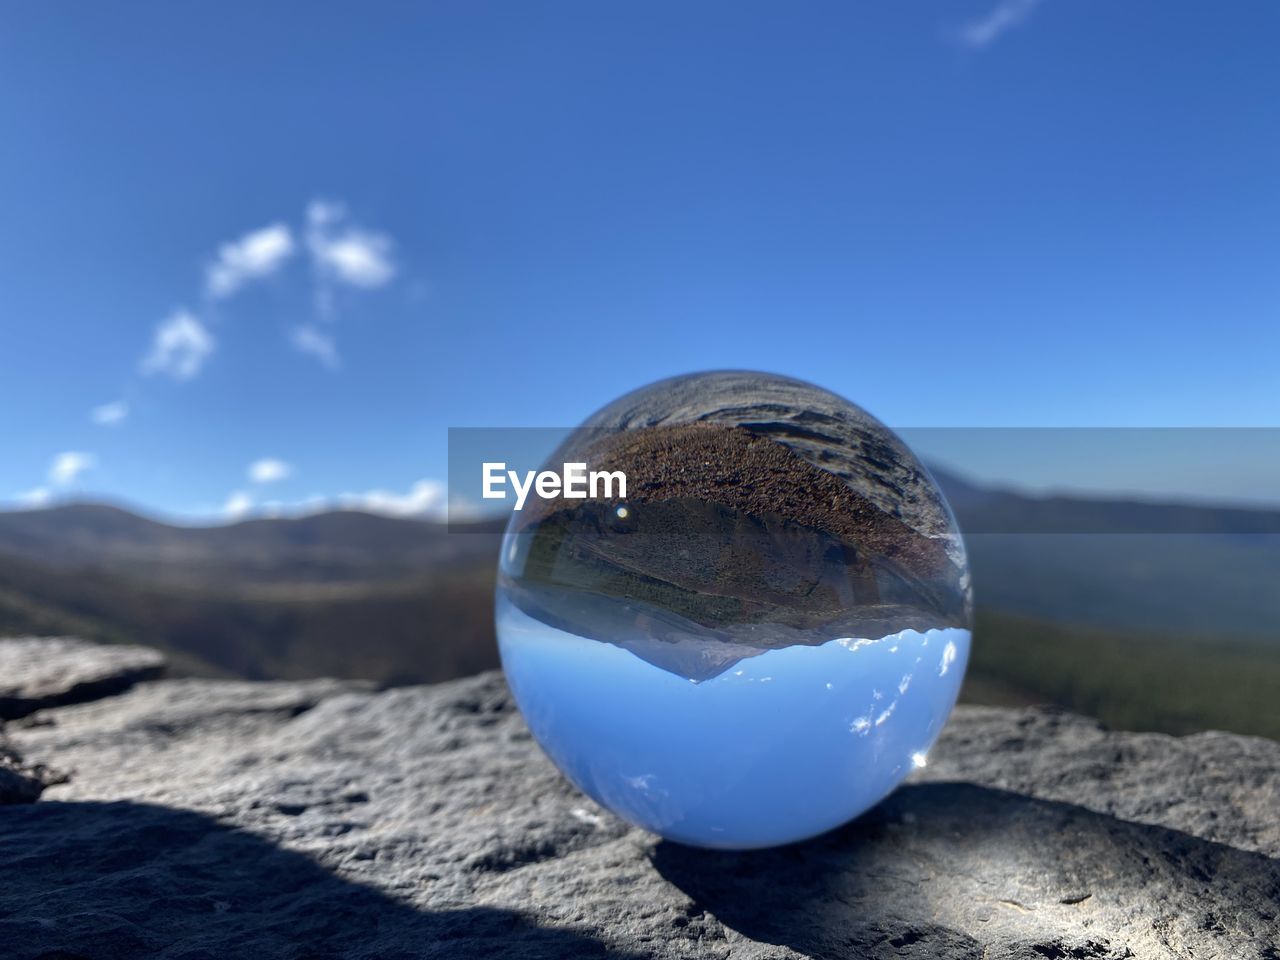 blue, sky, reflection, nature, sphere, environment, landscape, cloud, scenics - nature, no people, land, sea, sunlight, mountain, outdoors, day, physical geography, water, beauty in nature, globe - man made object, travel, shadow, rock, travel destinations, earth, planet earth, shape, crystal ball, single object, space, sunny, tranquility, tranquil scene, focus on foreground